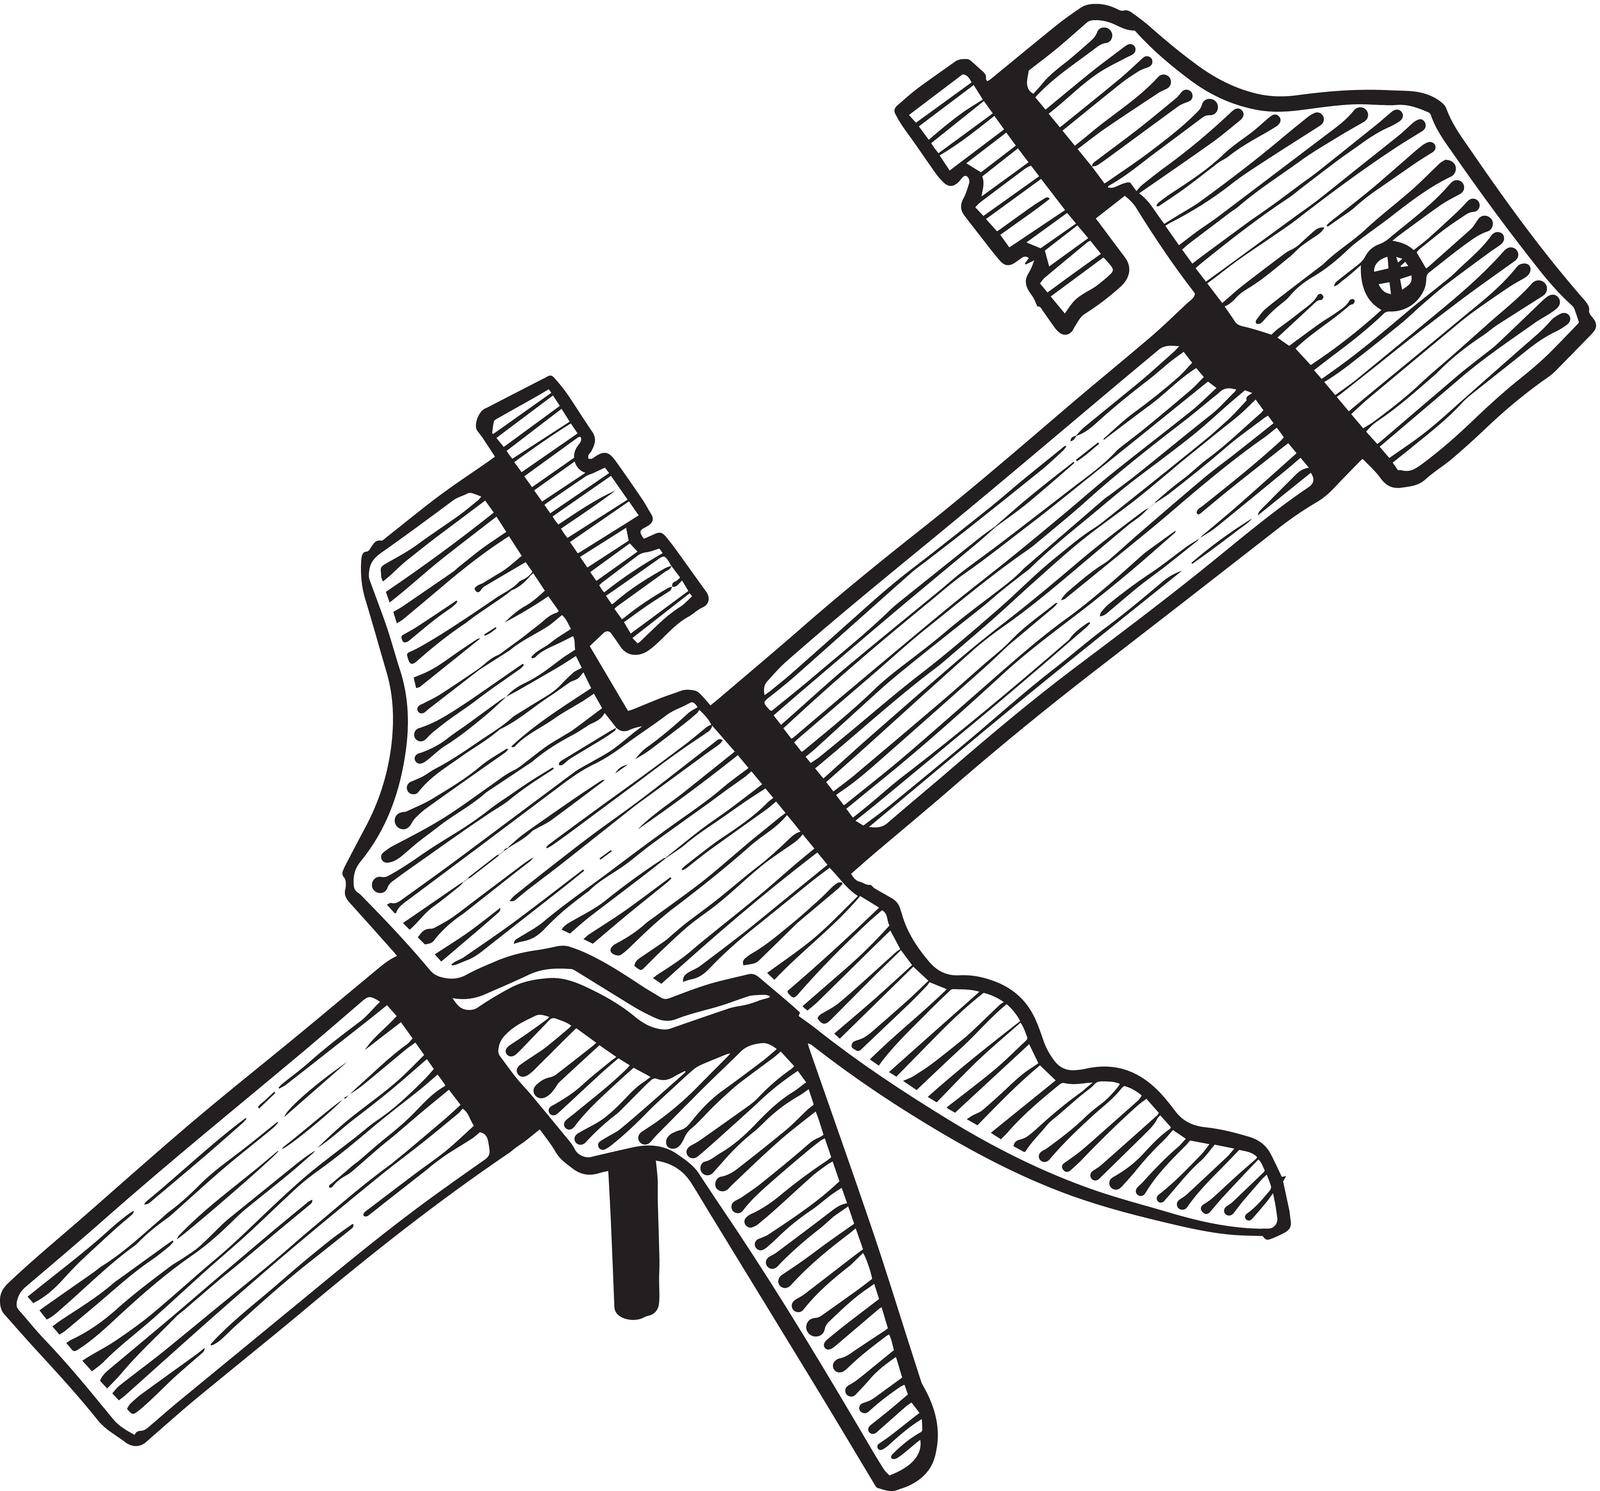 Woodworking clamp hand drawn illustration. by puruan